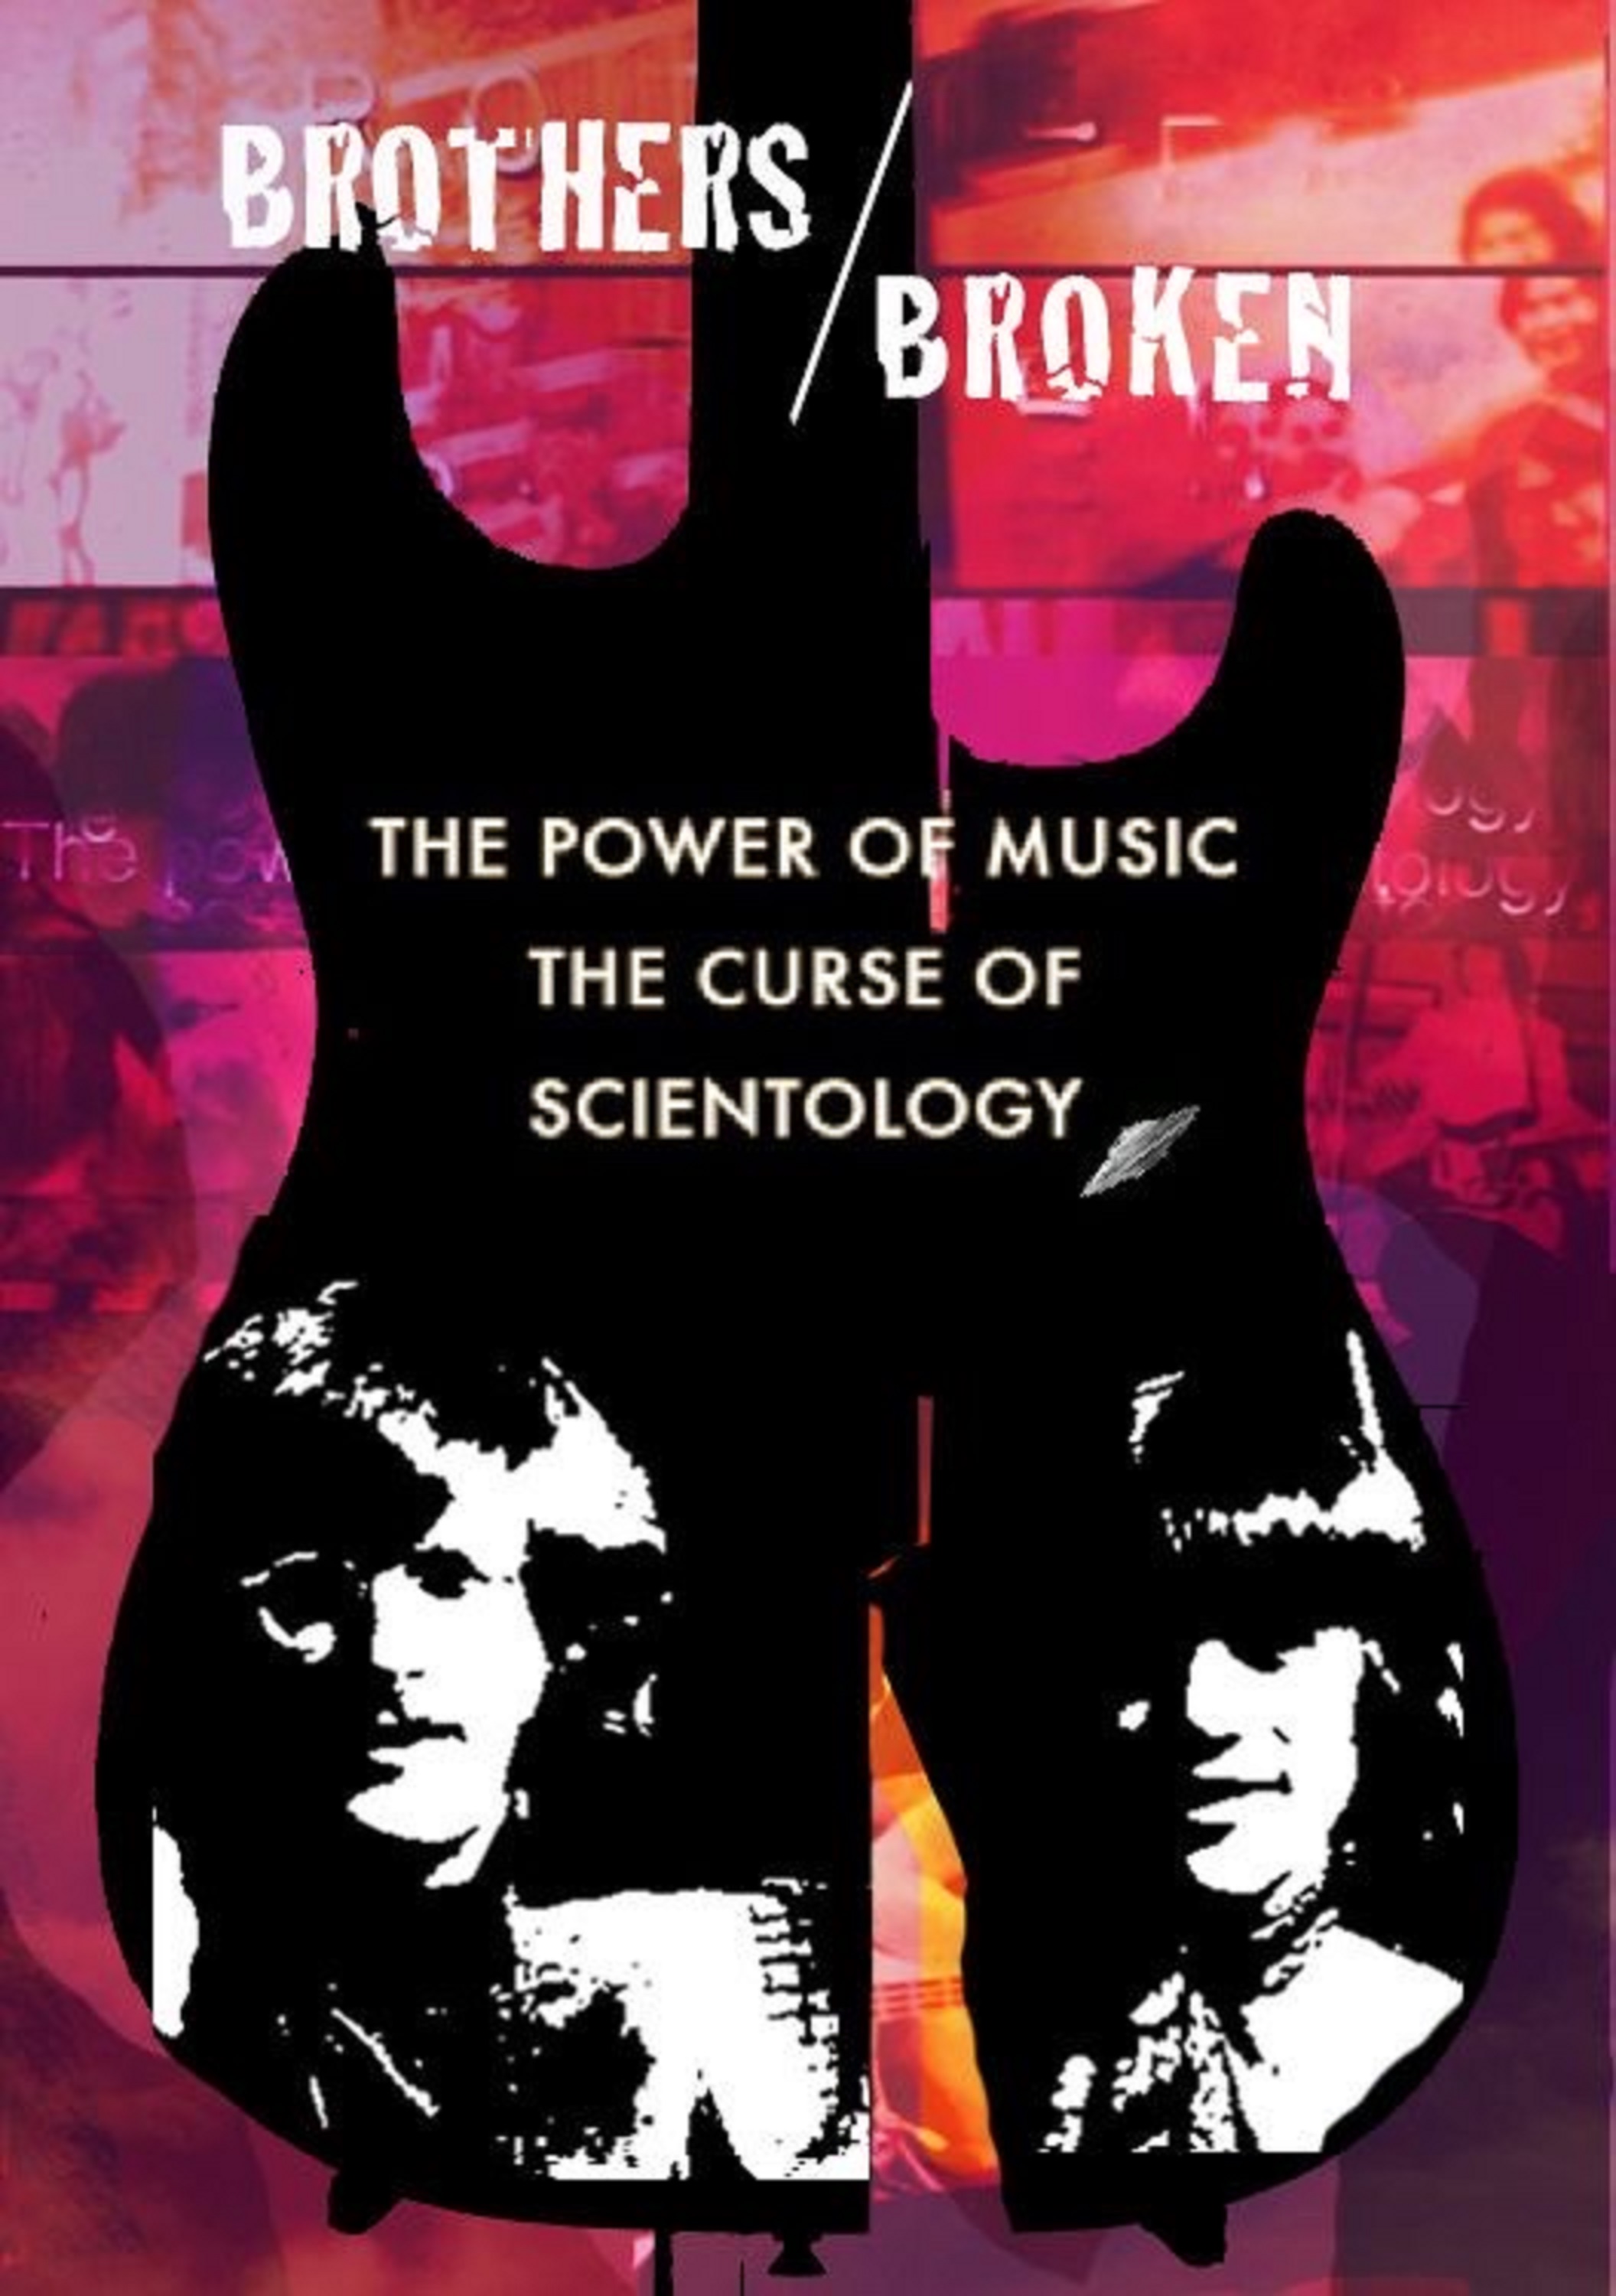 Rock Documentary Meets Scientology Cult Horrow Show w/ "Brothers Broken" Documentary